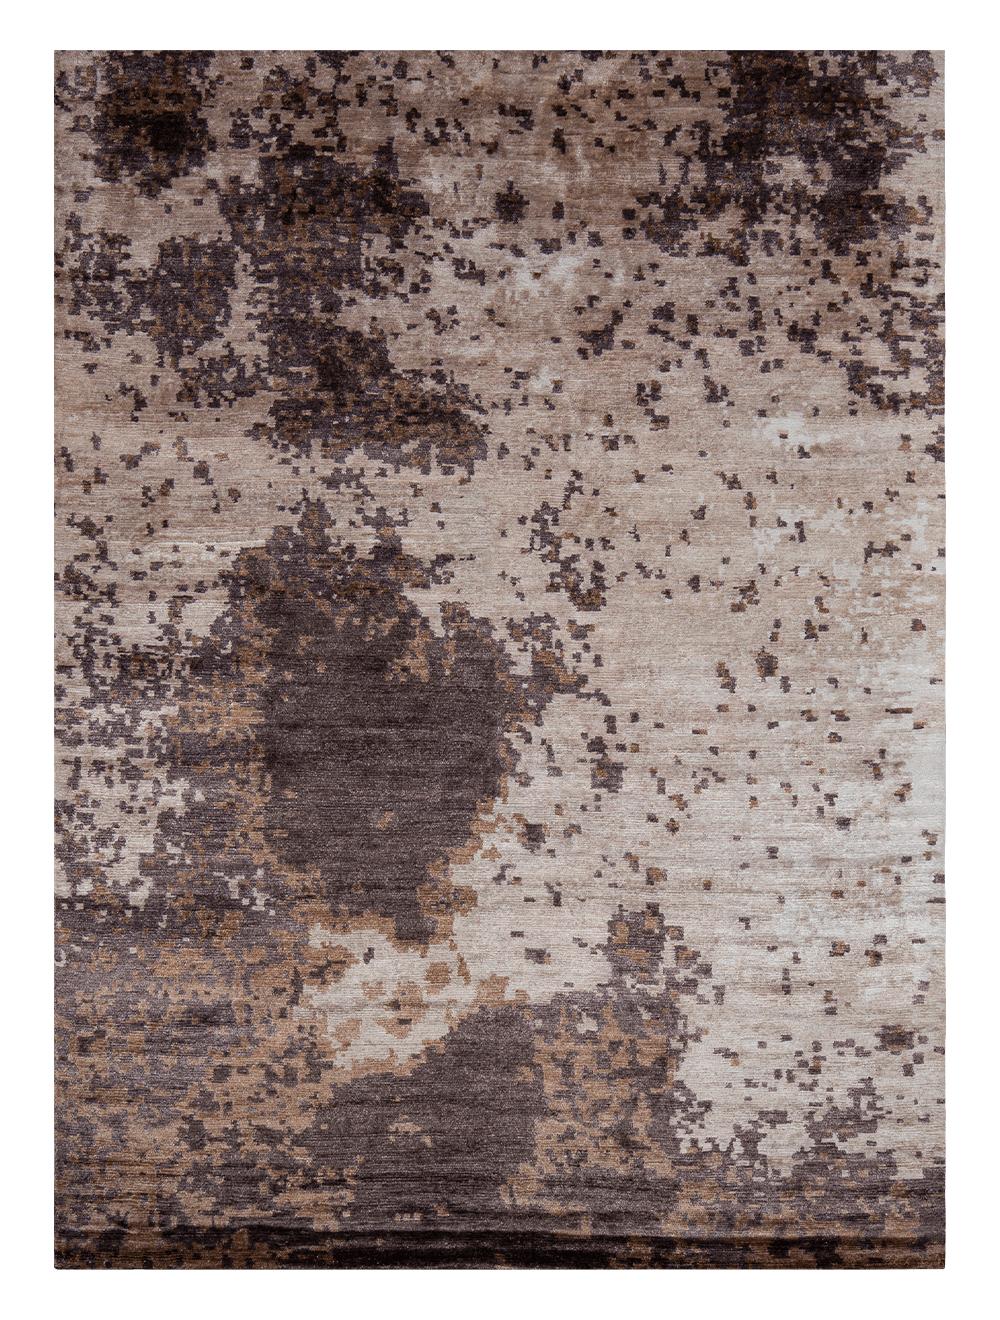 Copper Moon Carpet by Massimo Copenhagen.
Handknotted.
Materials: 100% Bamboo. 
Dimensions: W 200 x H 300 cm.
Available colors: Moon Night and Copper Moon.
Other dimensions are available: 170x240 cm and special sizes.

Copper Moon is a high